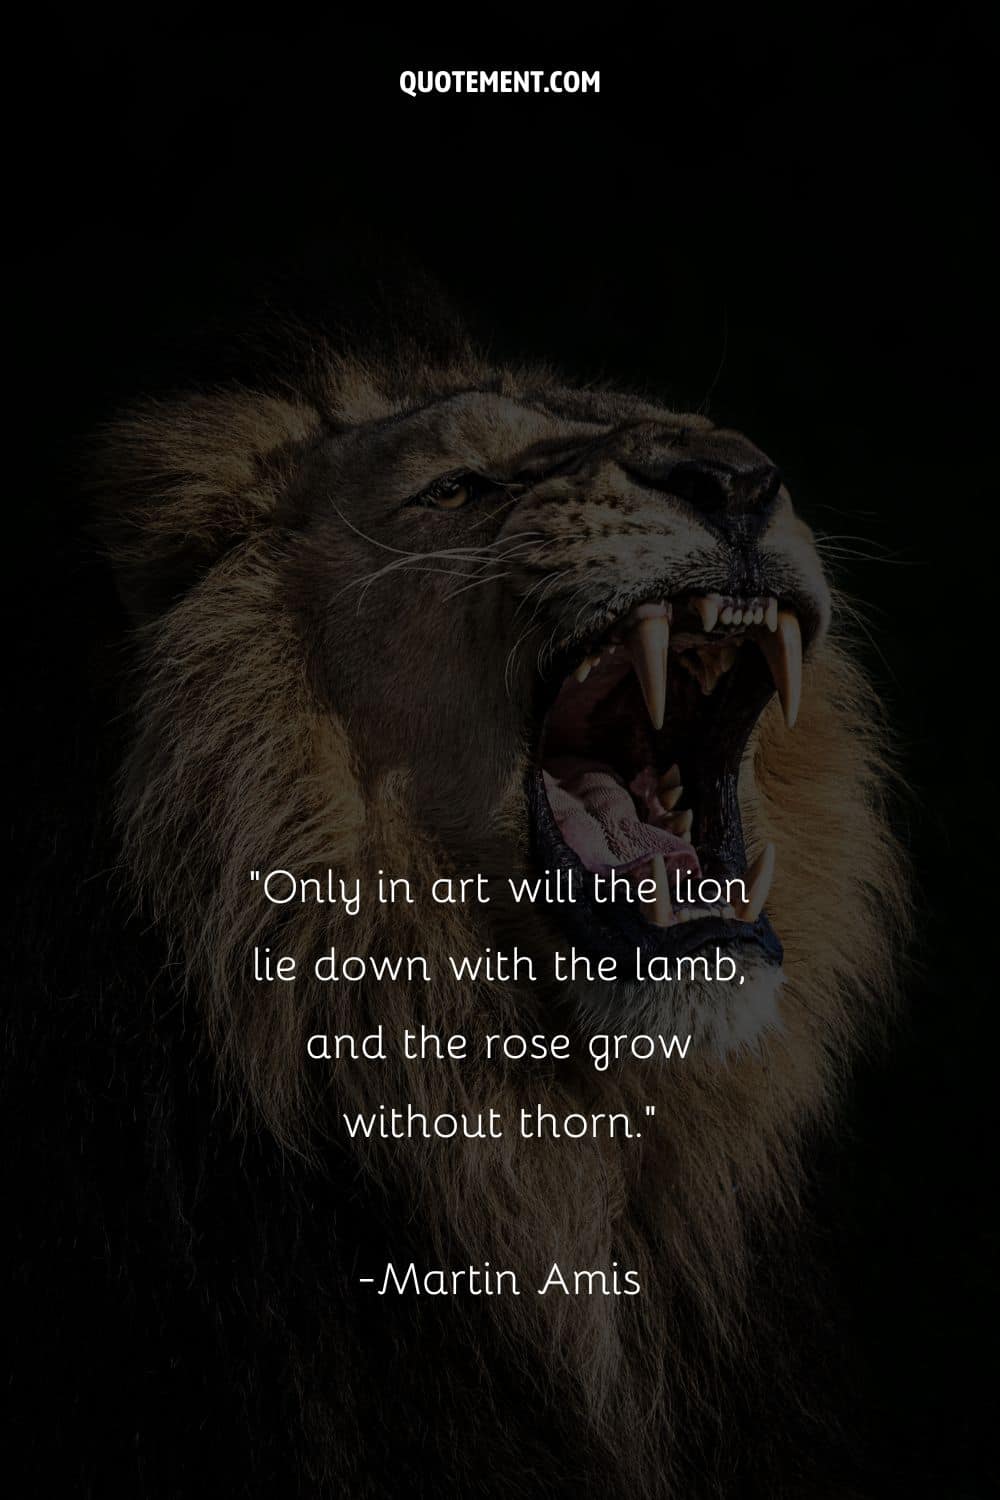 Only in art will the lion lie down with the lamb, and the rose grow without thorn.